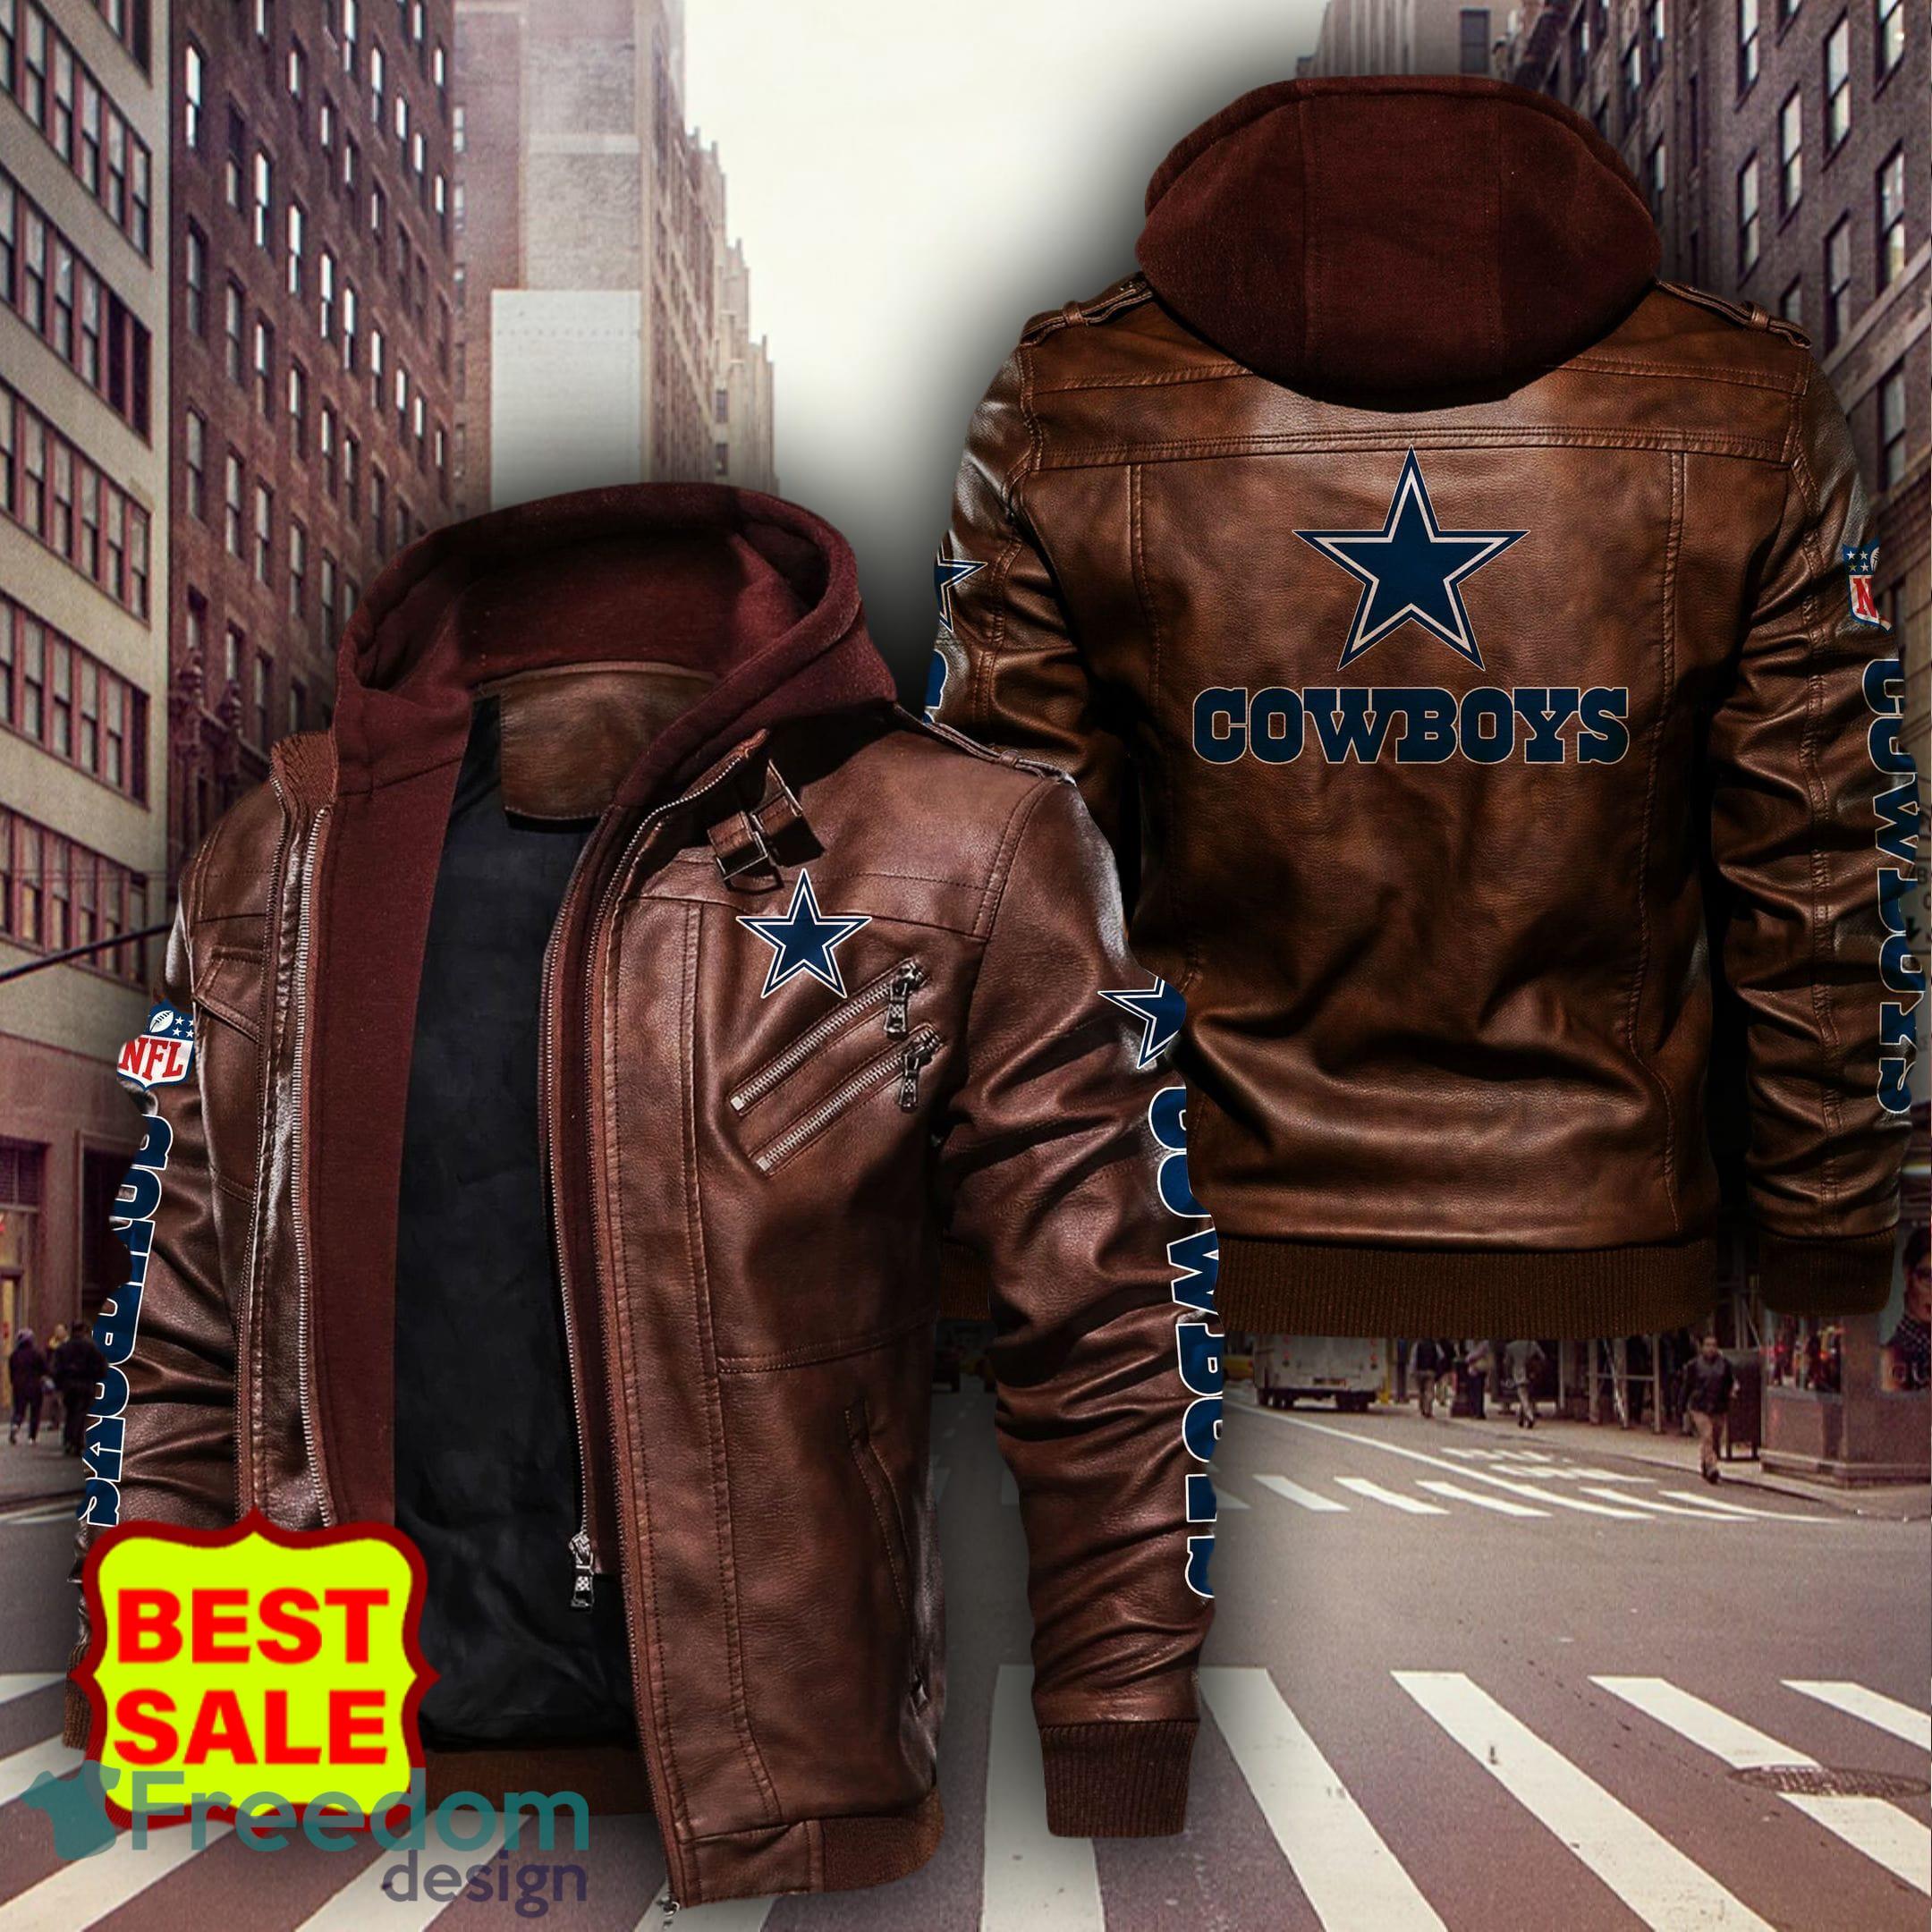 nfl leather jackets for sale